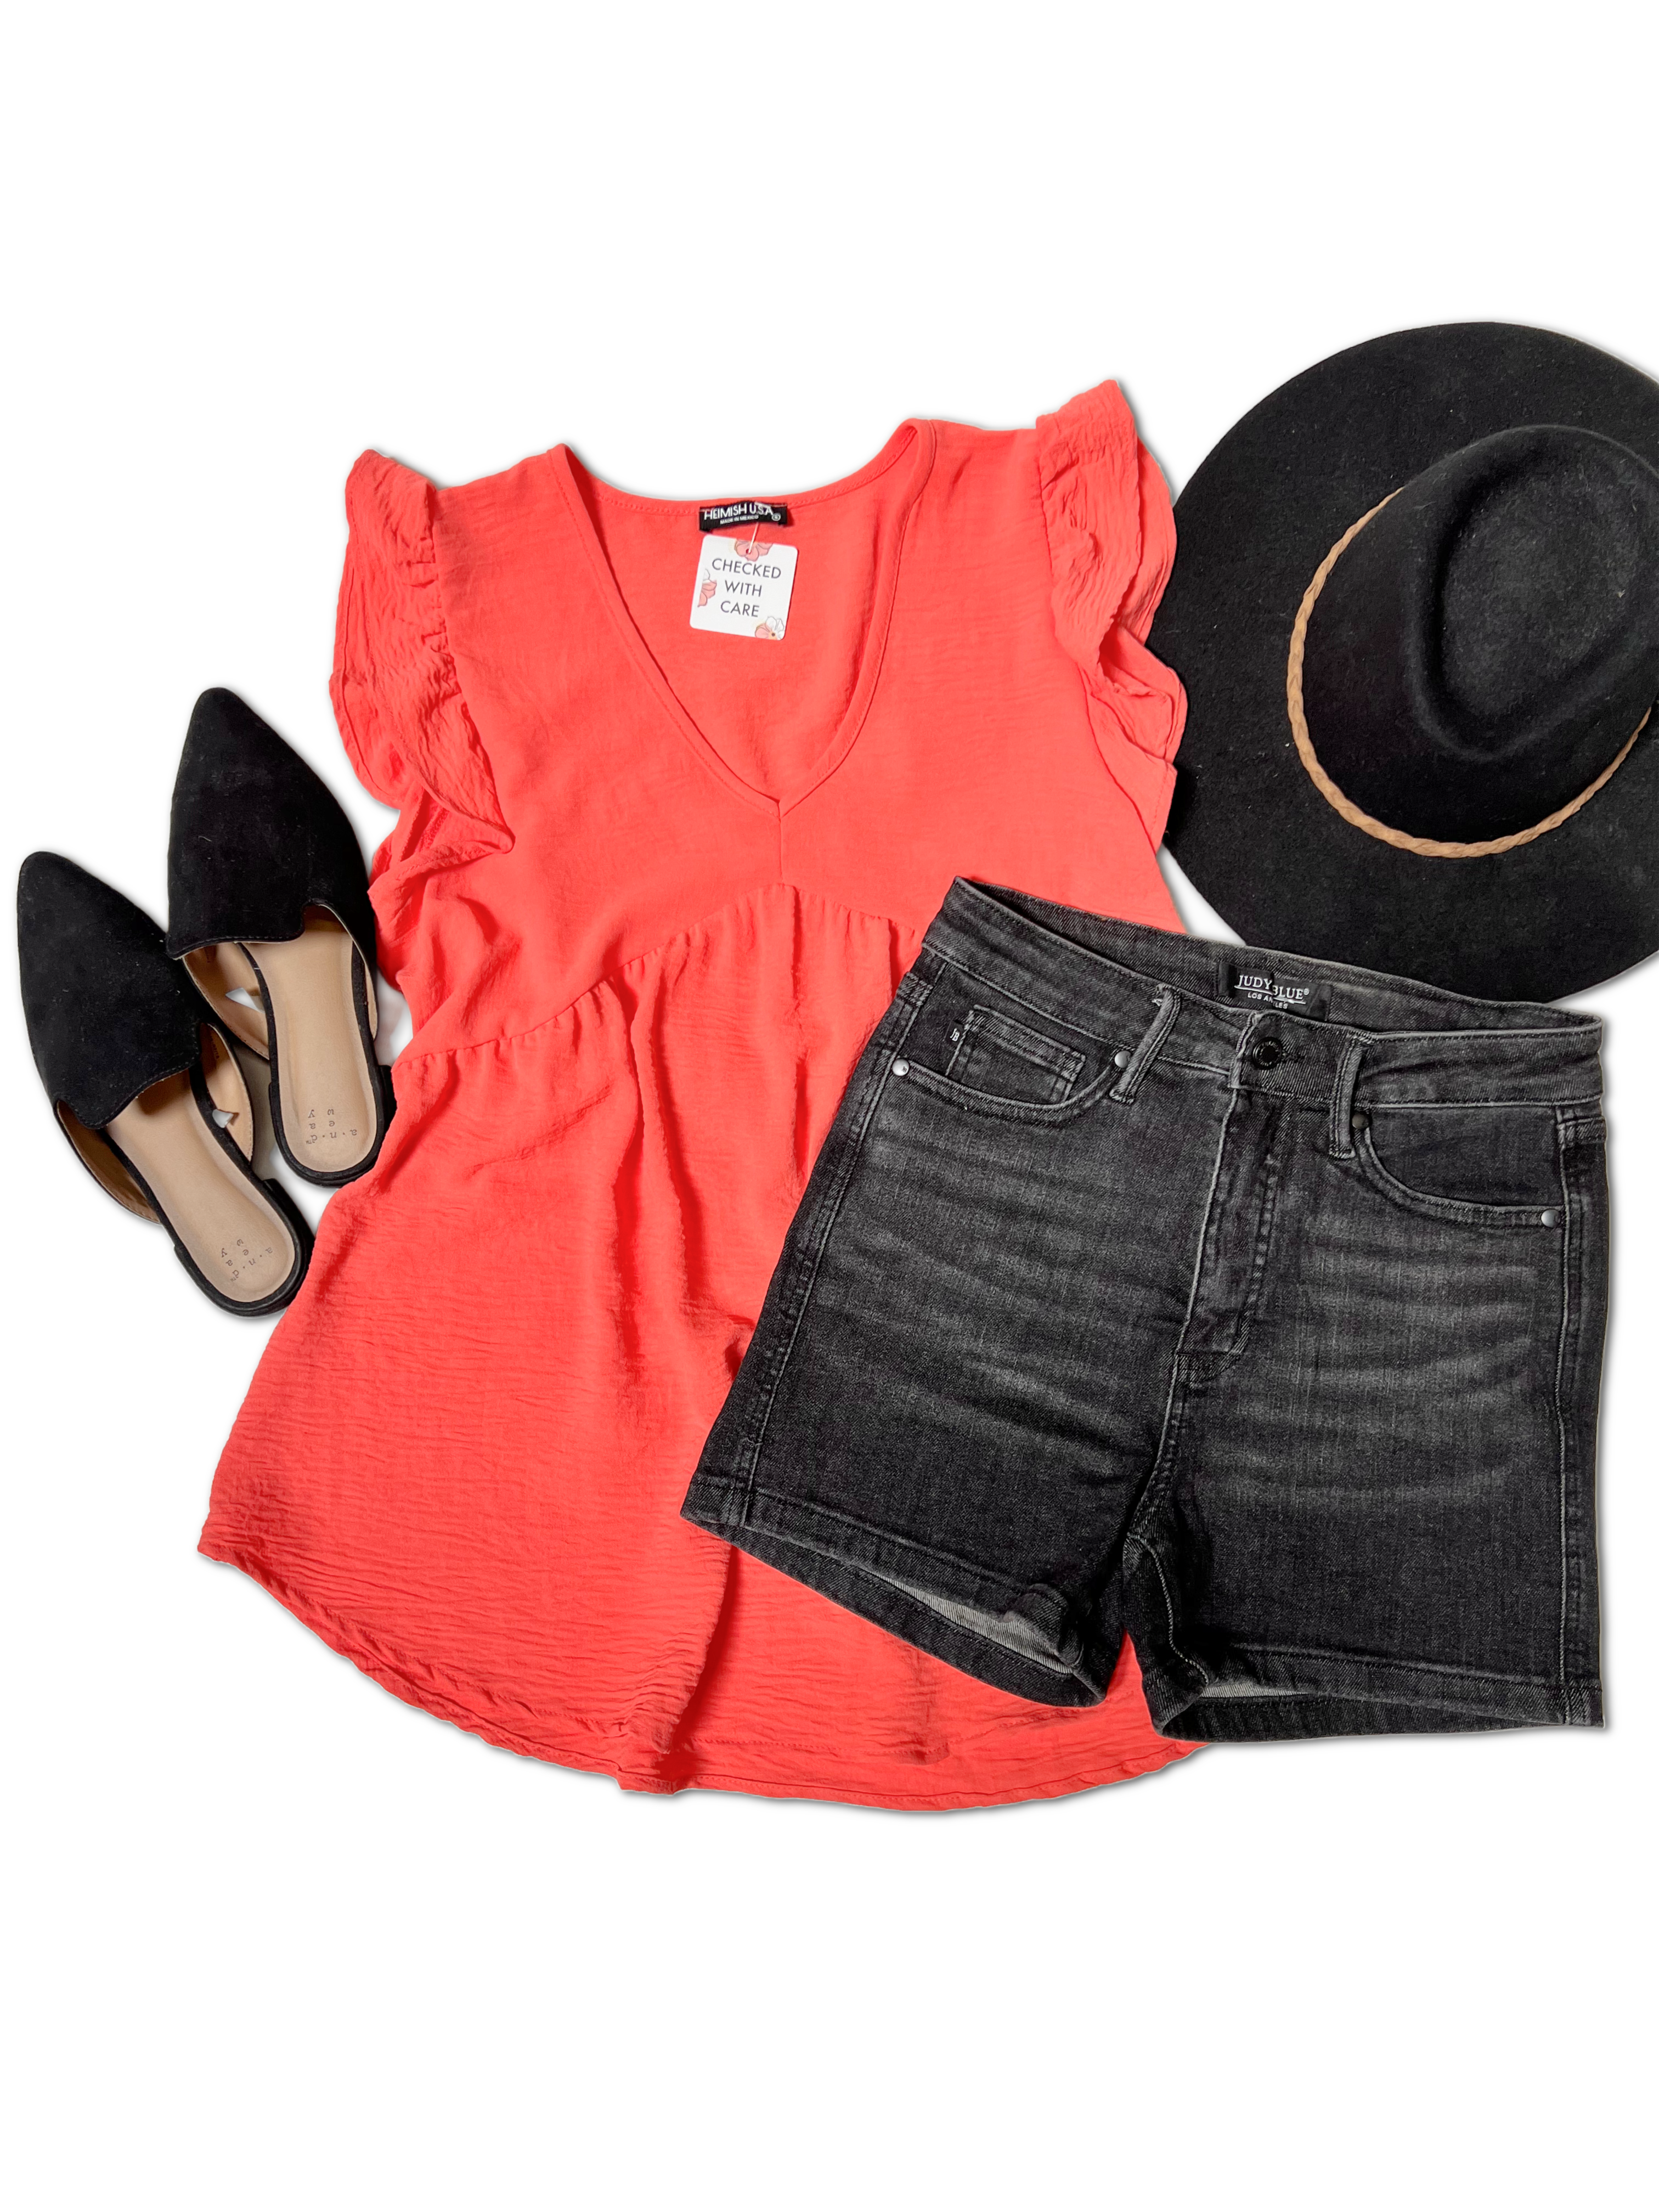 A flat lay of a casual outfit featuring the Heimish Feel The Flutter - Top with butterfly short sleeves in bright coral, dark gray denim shorts, a black wide-brim hat with a tan band, and black suede pointed-toe flats.